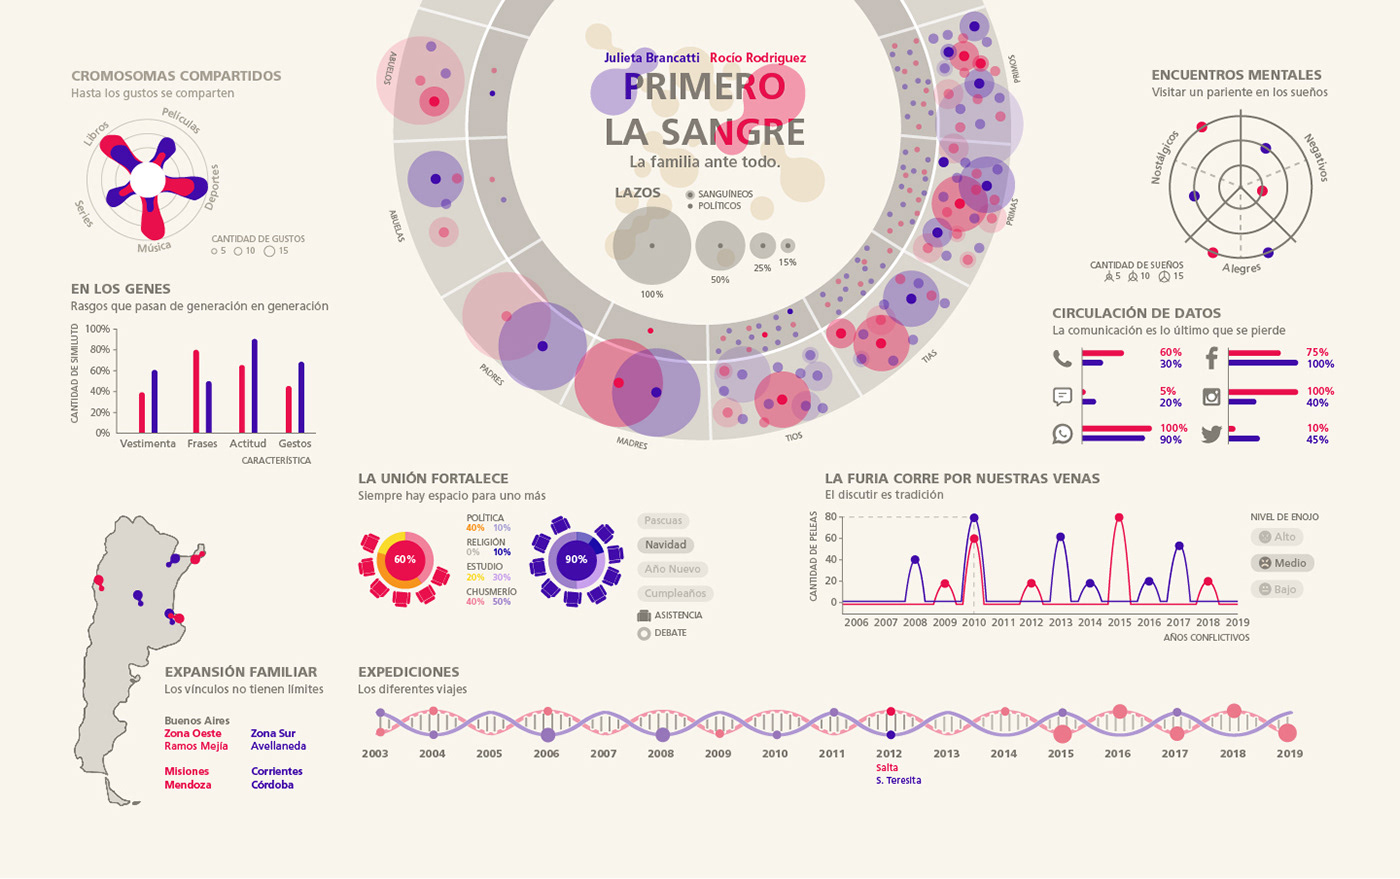 uade diseño diseño gráfico infografia design infographic infography information relations Data